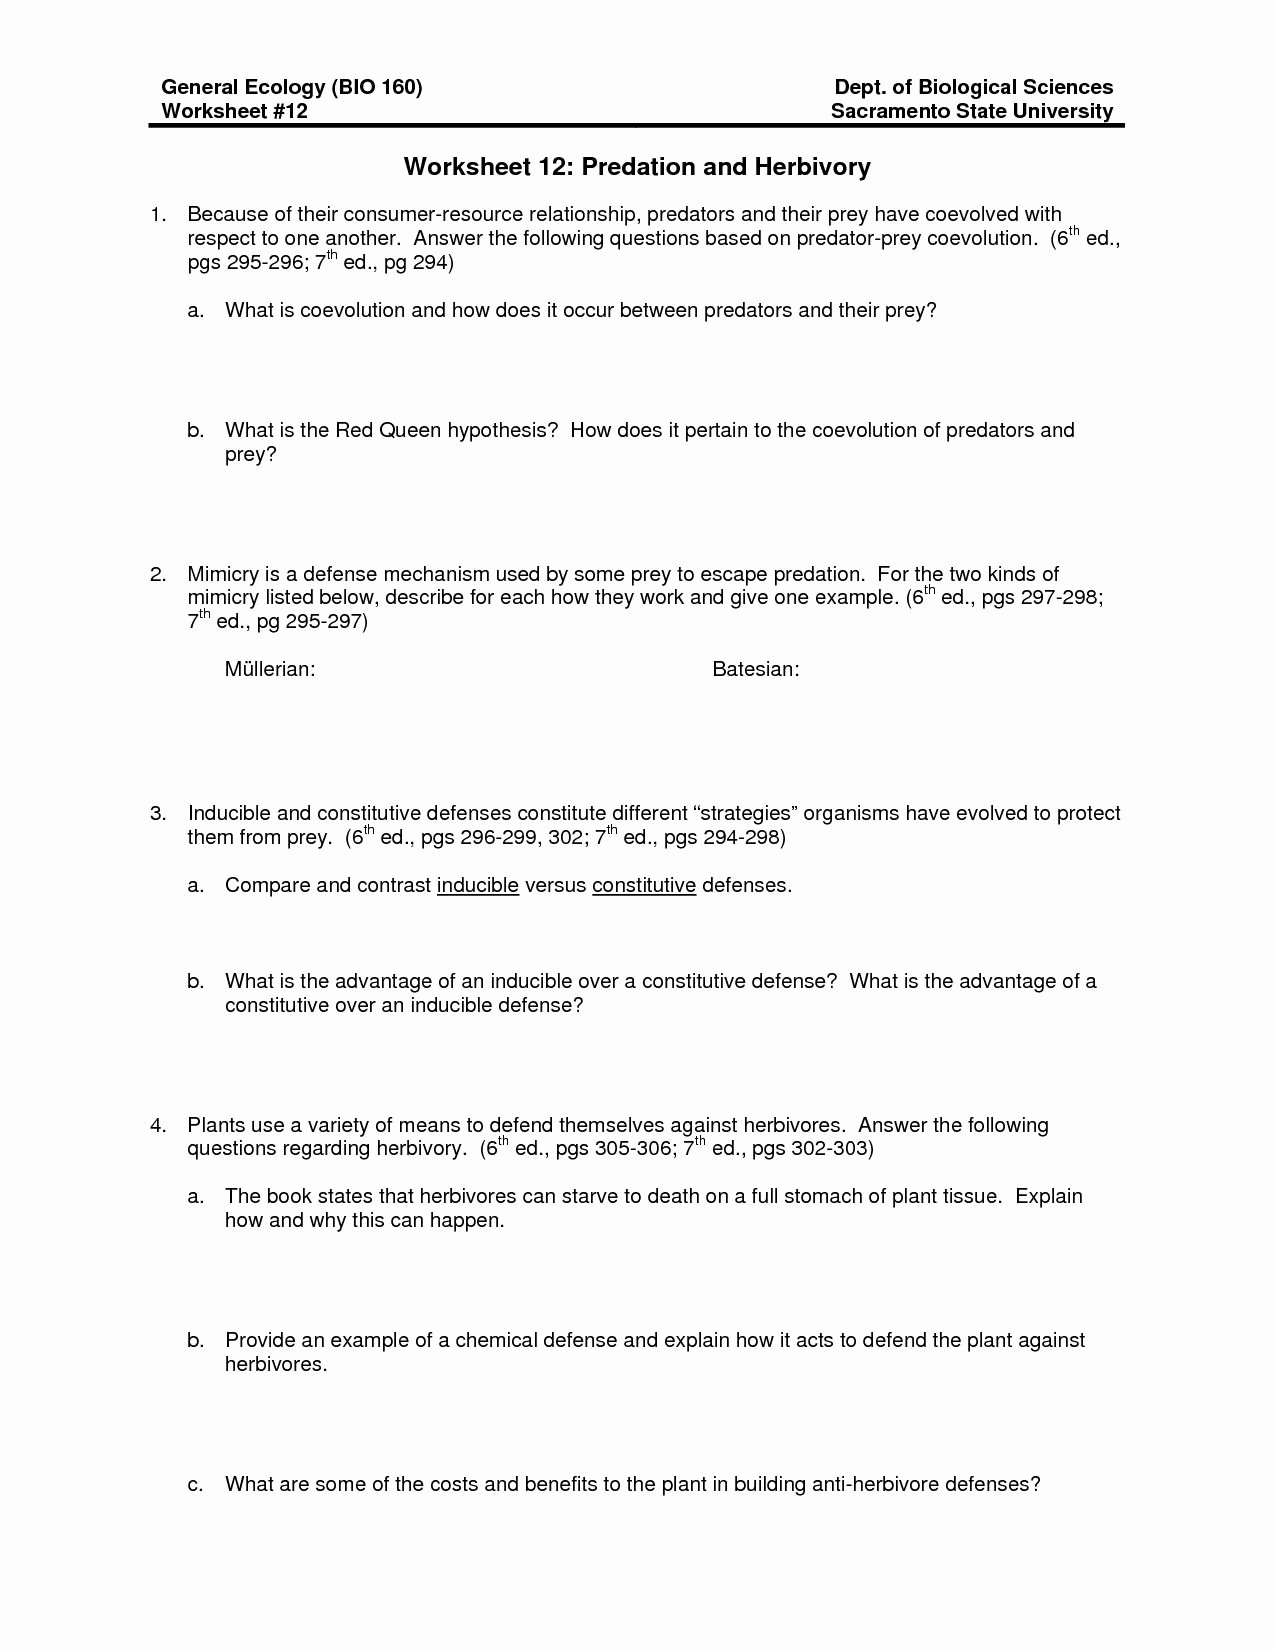 Ecological Relationships Worksheet Answers Awesome Ecological Relationships Worksheet Answers